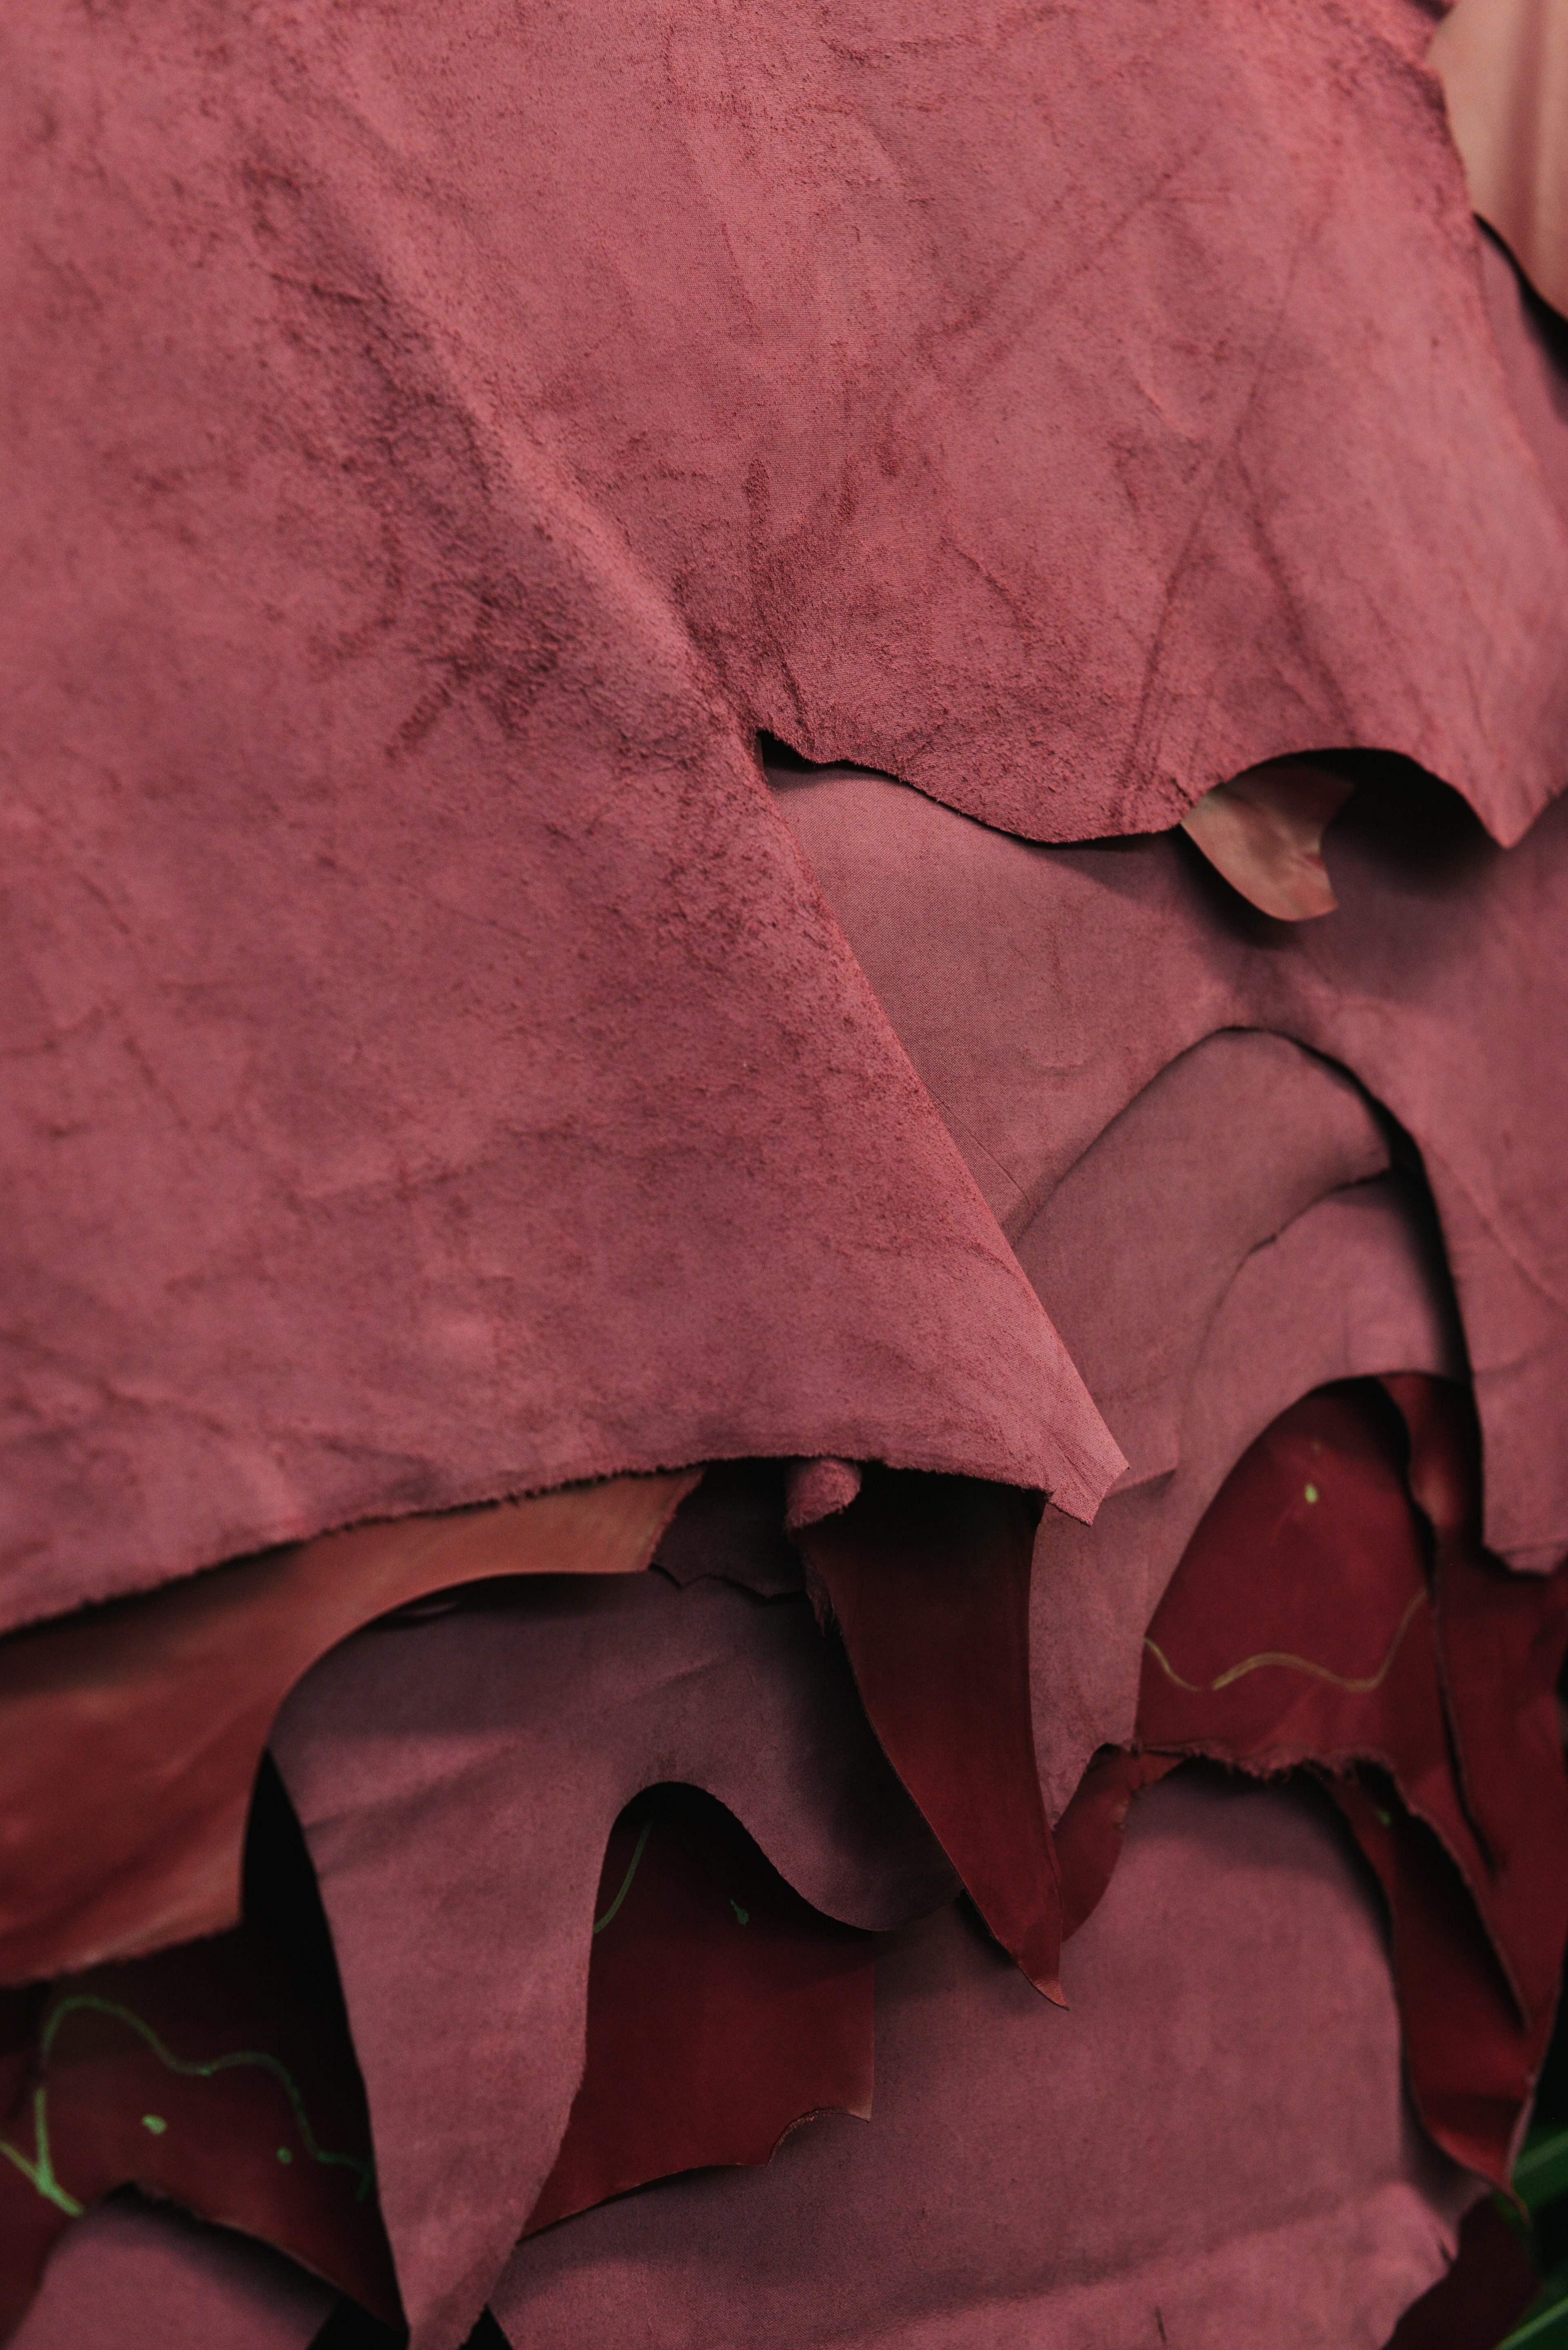 #3840x5754 Material Suede Leather And Fabric Hd 4k - Visual Arts , HD Wallpaper & Backgrounds